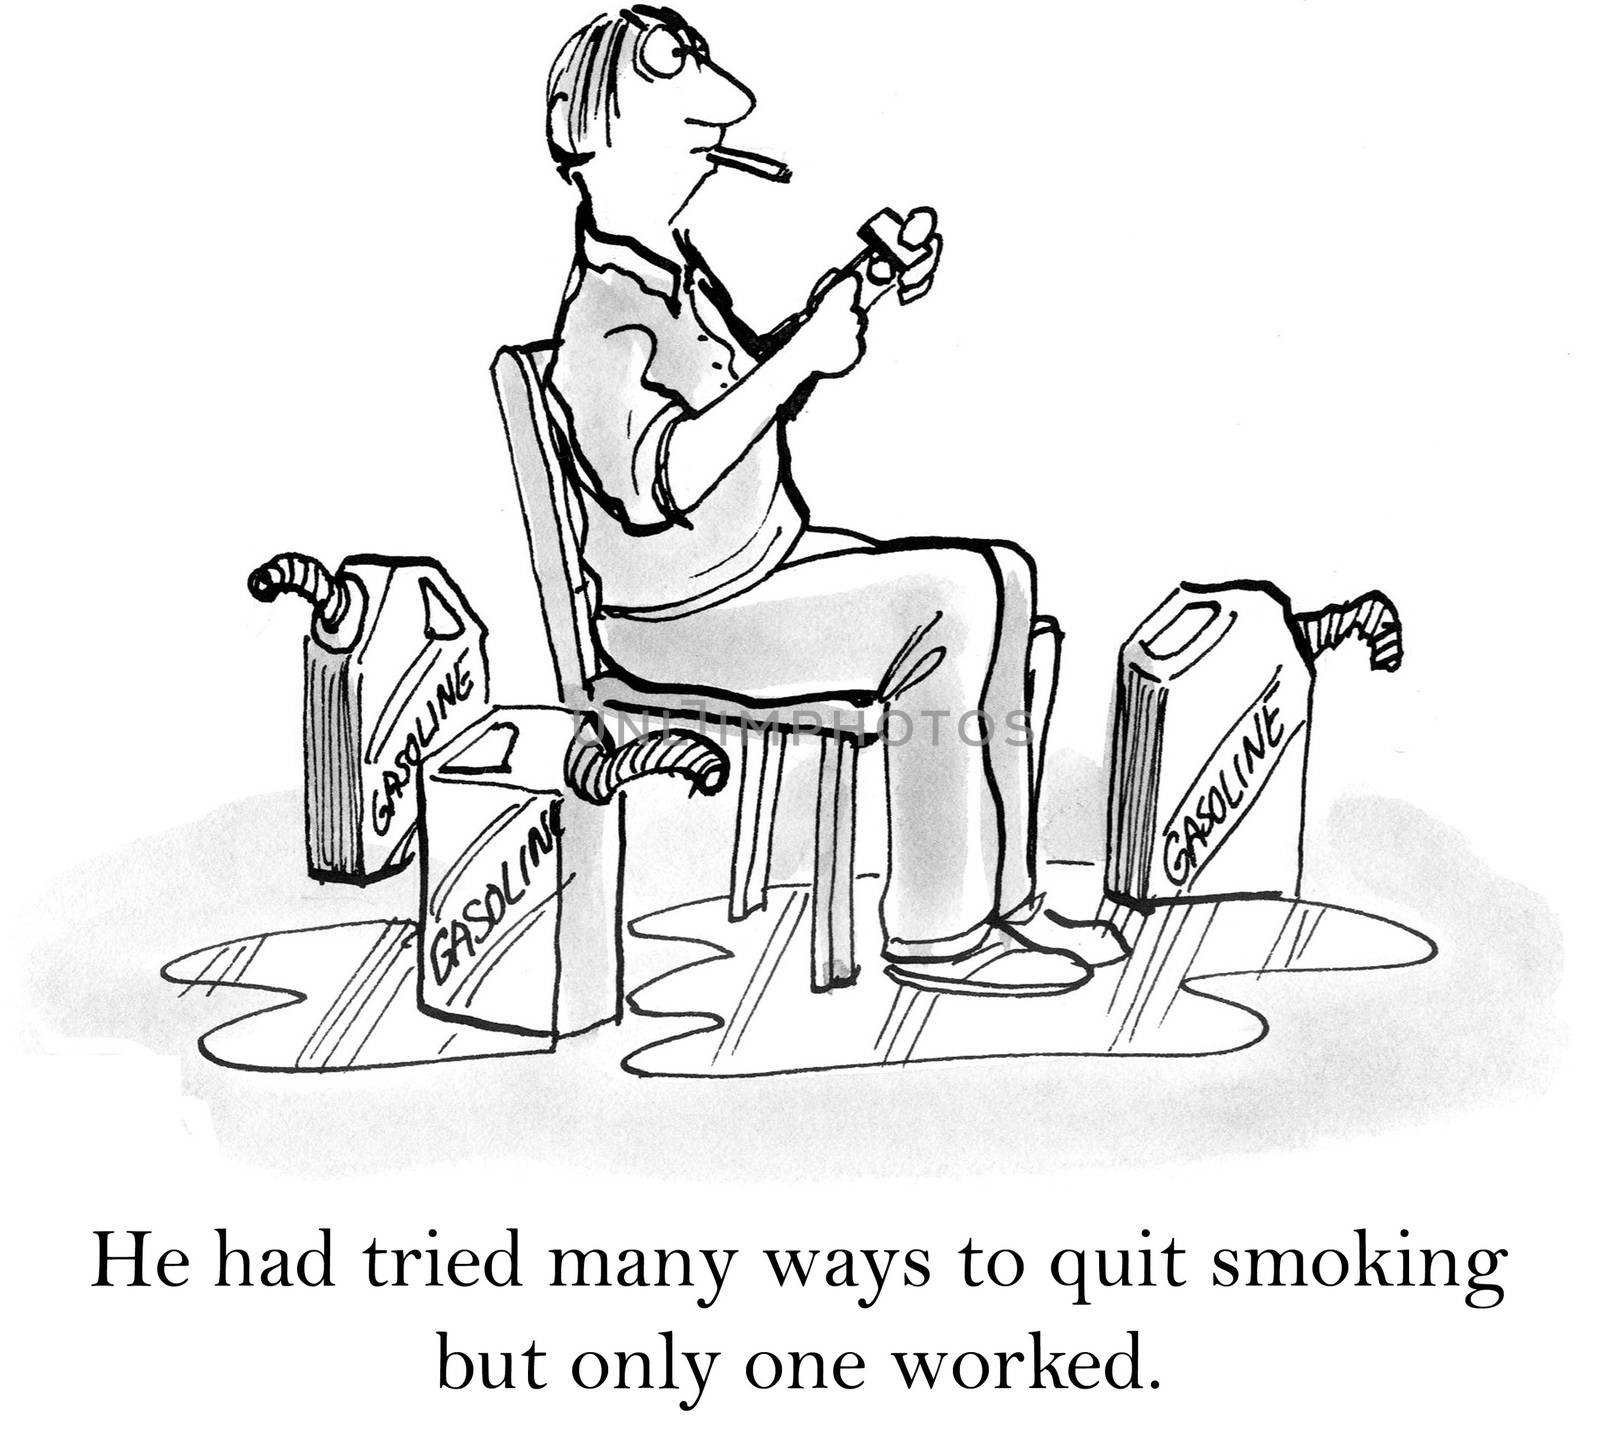 He had tried many ways to quit smoking by andrewgenn